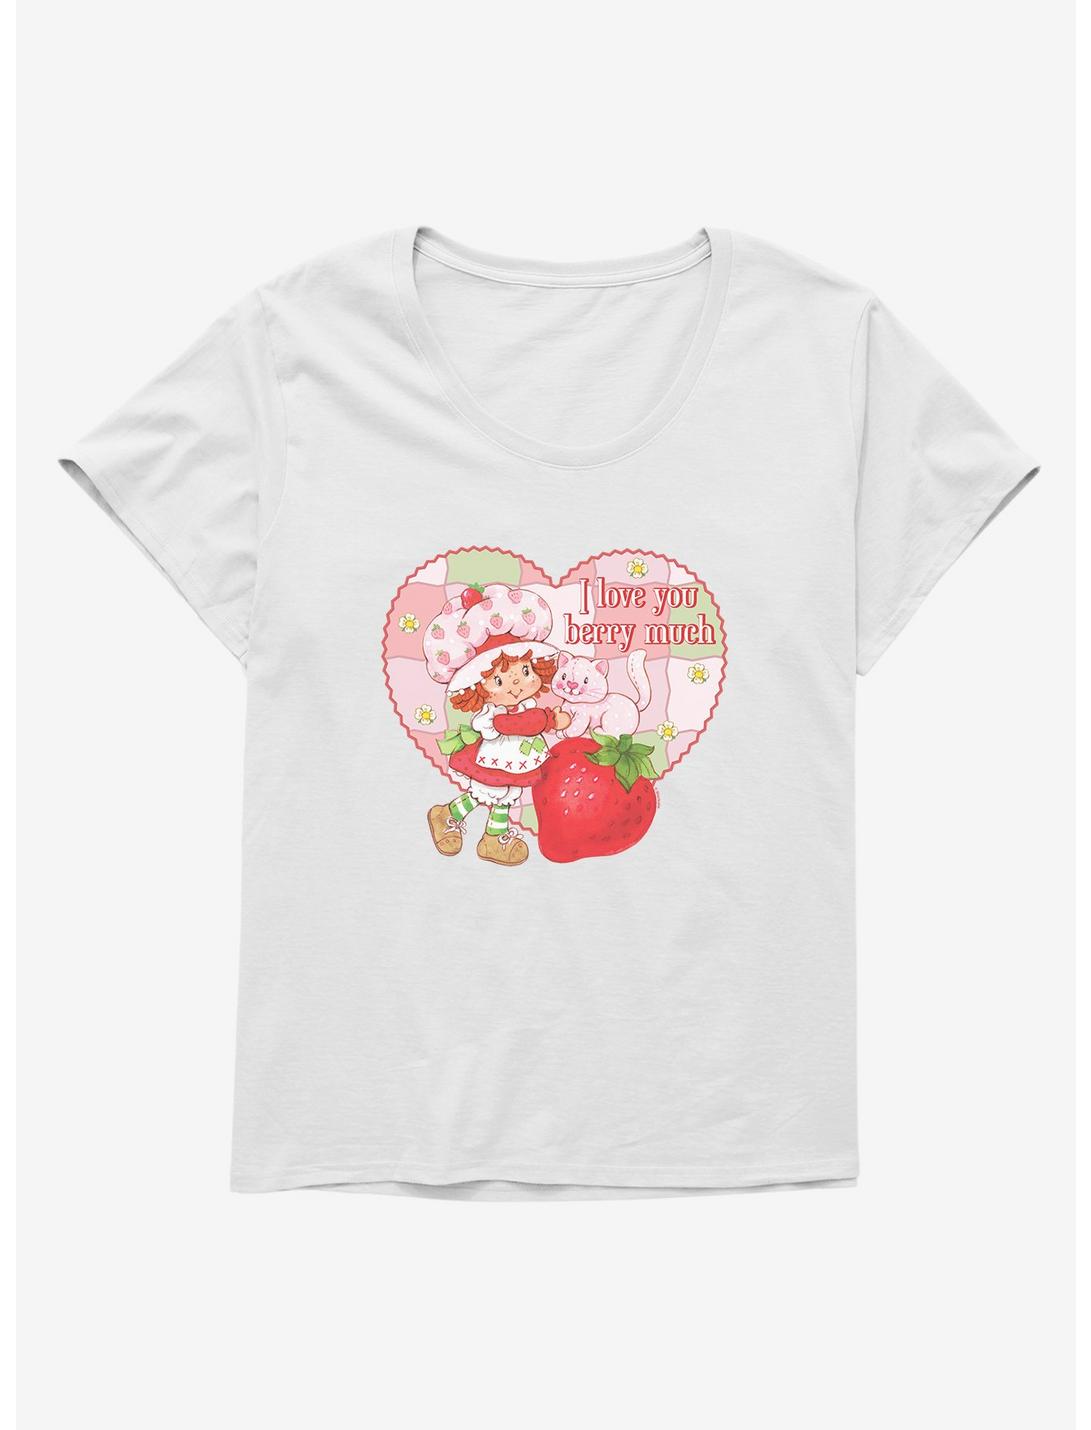 Strawberry Shortcake I Love You Berry Much Girls T-Shirt Plus Size, WHITE, hi-res